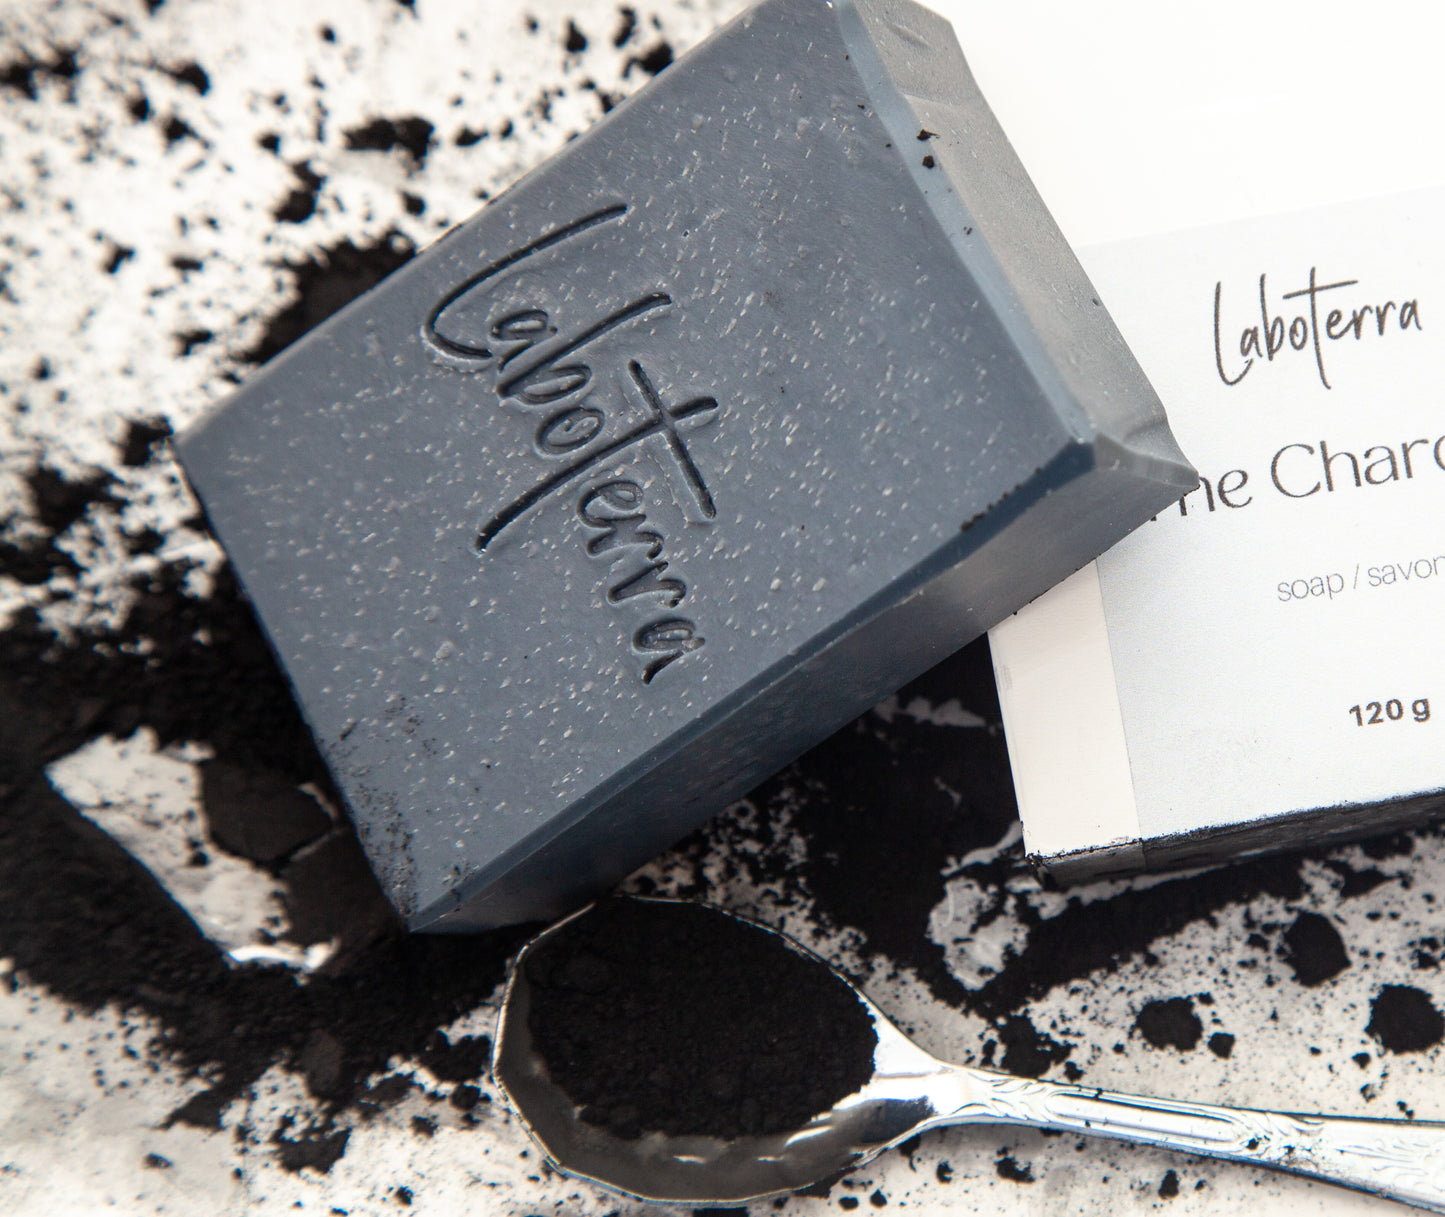 The Charcoal Soap Bar